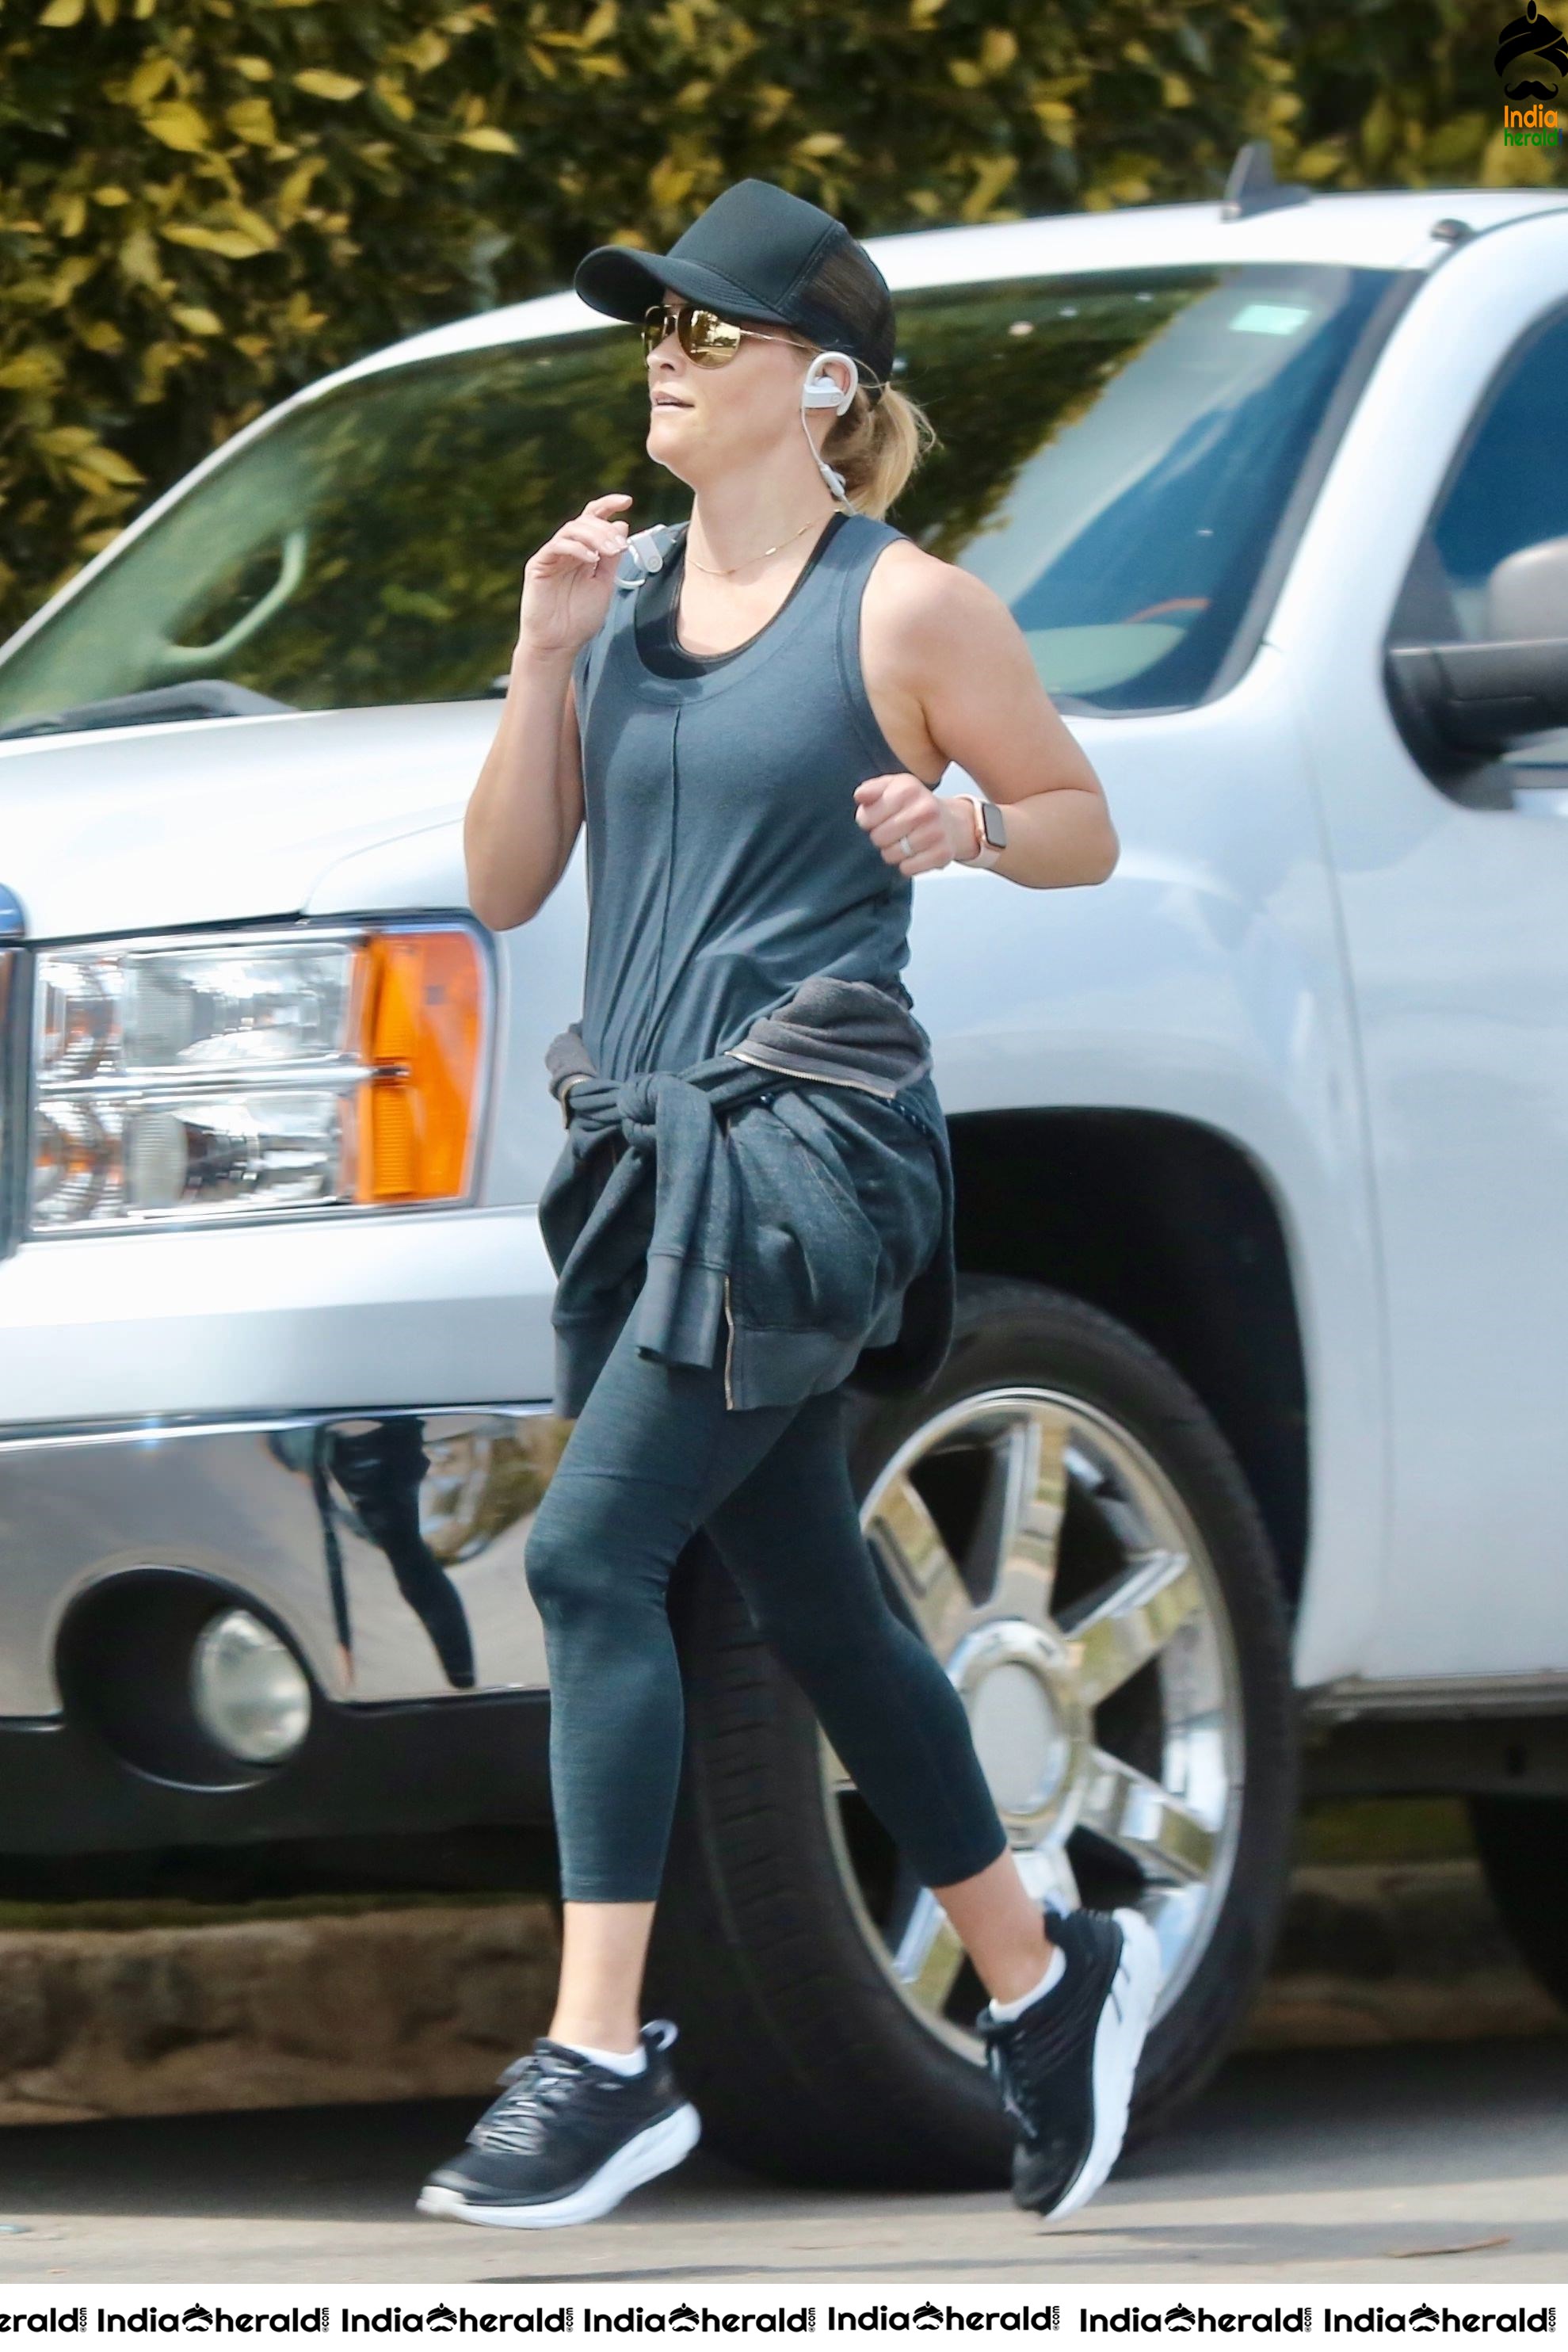 Reese Witherspoon caught by Paparazzi while jogging in Brentwood